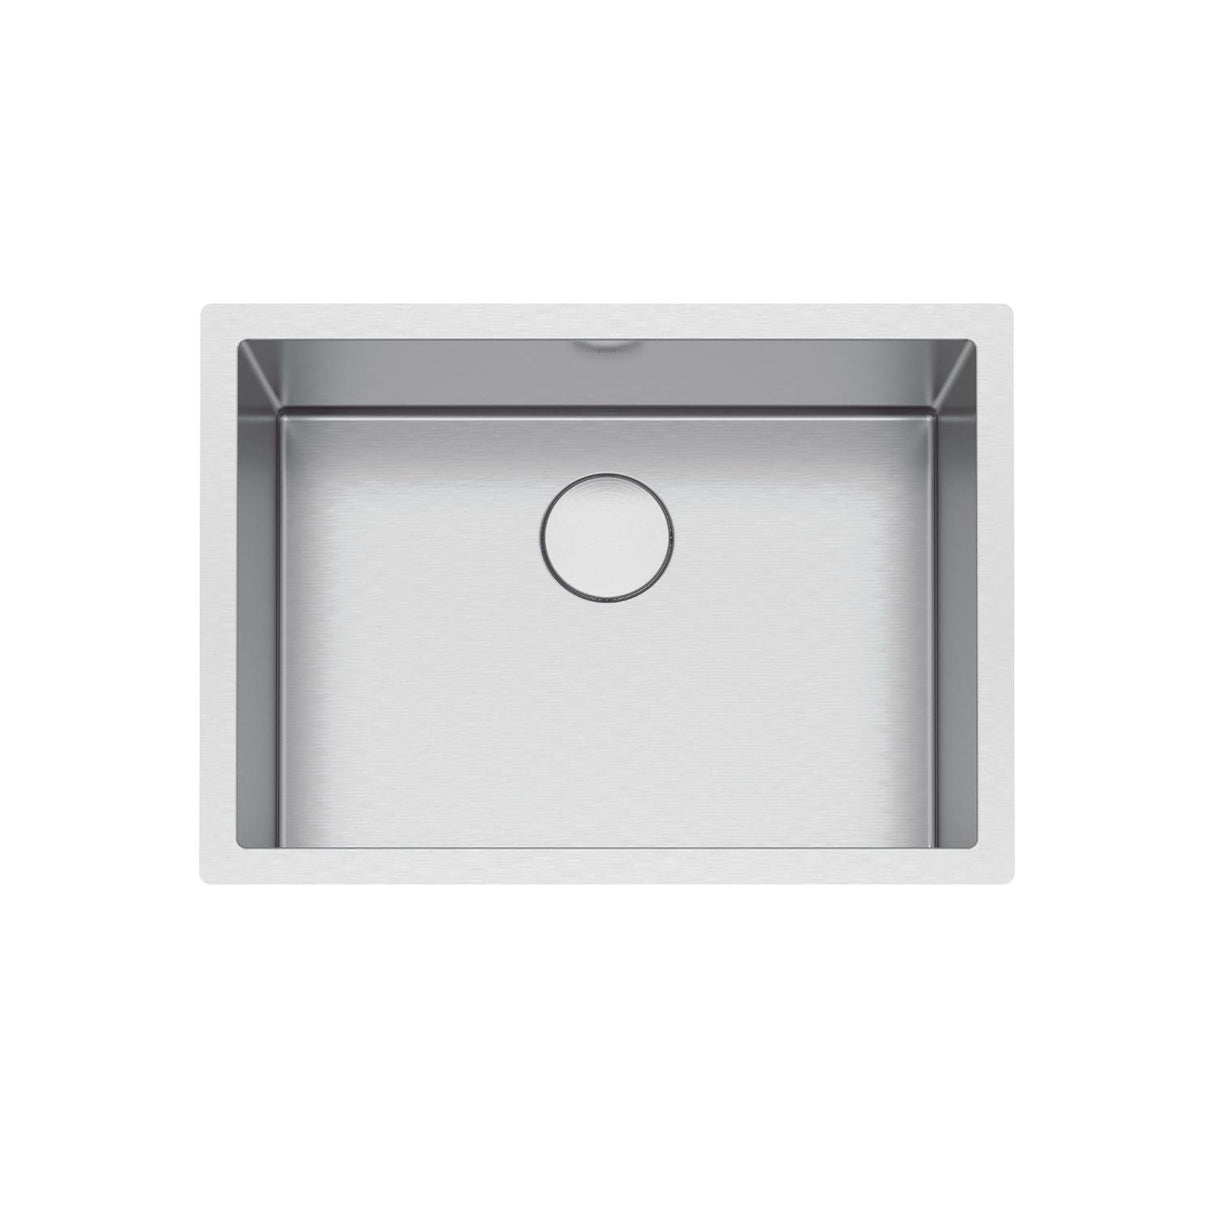 FRANKE PS2X110-24 Professional 2.0 26.5-in. x 19.5-in. 16 Gauge Stainless Steel Undermount Single Bowl  Kitchen Sink - PS2X110-24 In Diamond